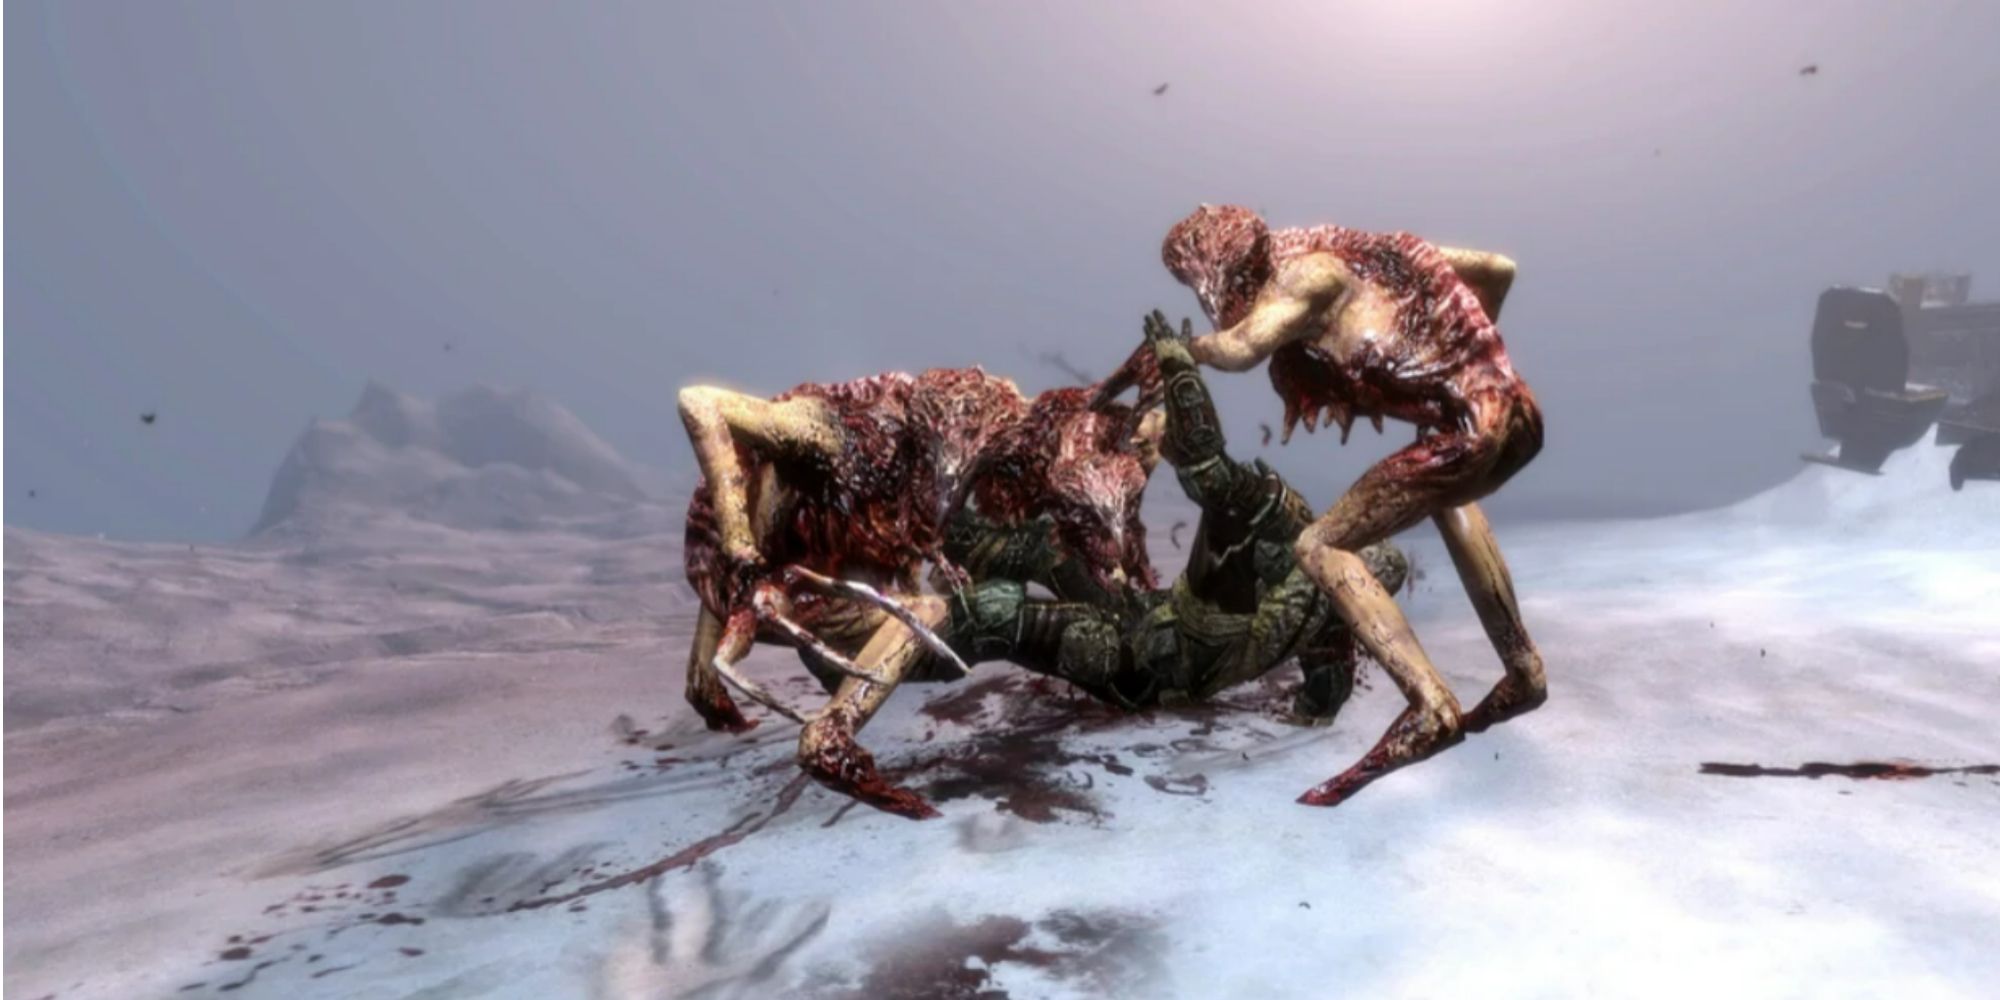 stalker necromorphs attacking character in dead space